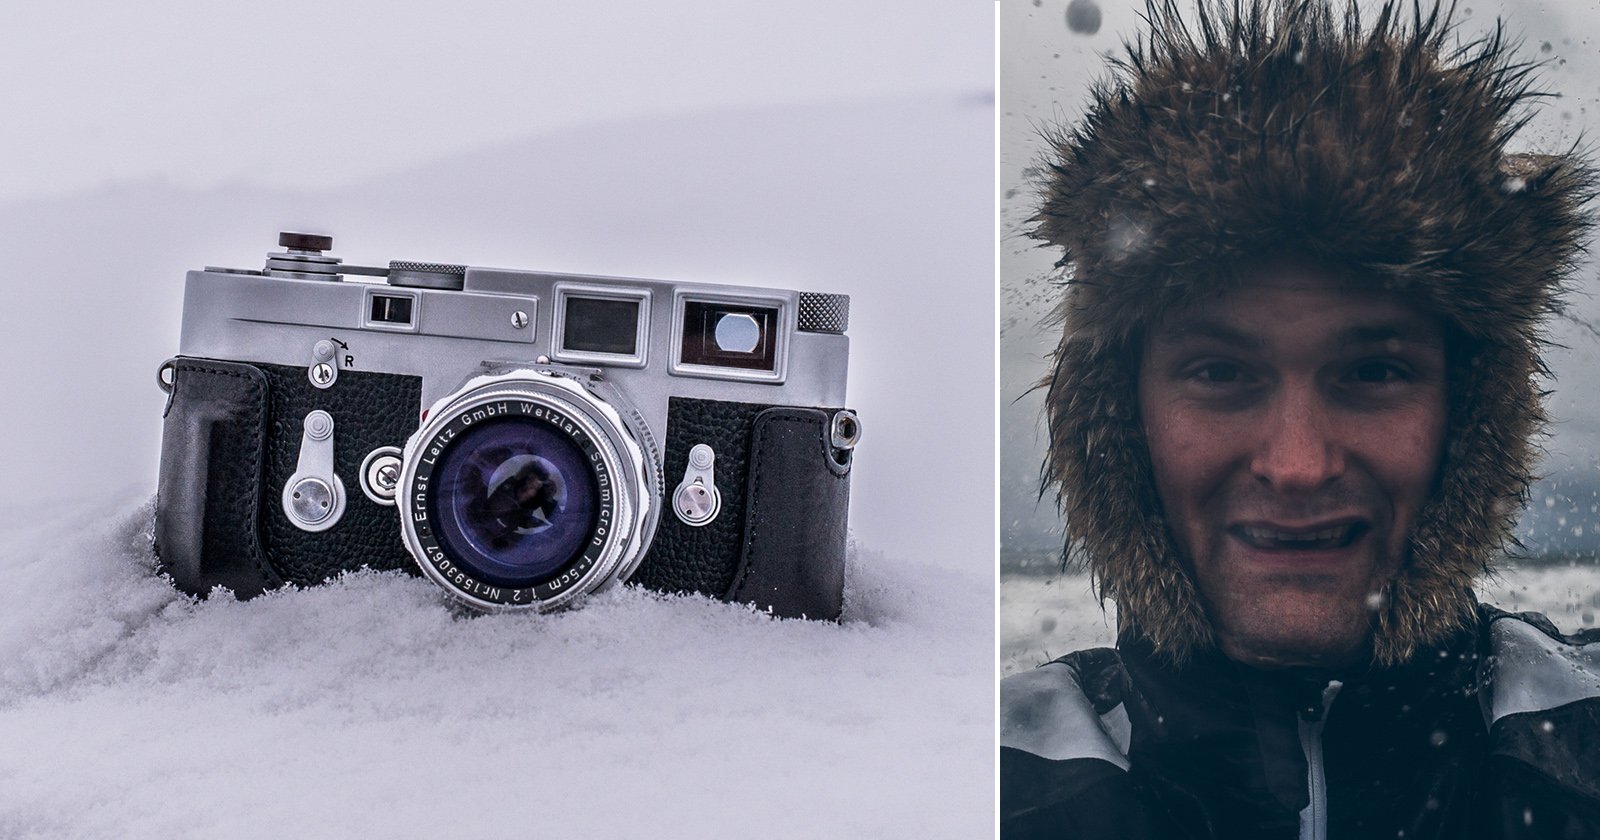 Soaking, Freezing, and Overheating a Leica M: A Different Sort of Review